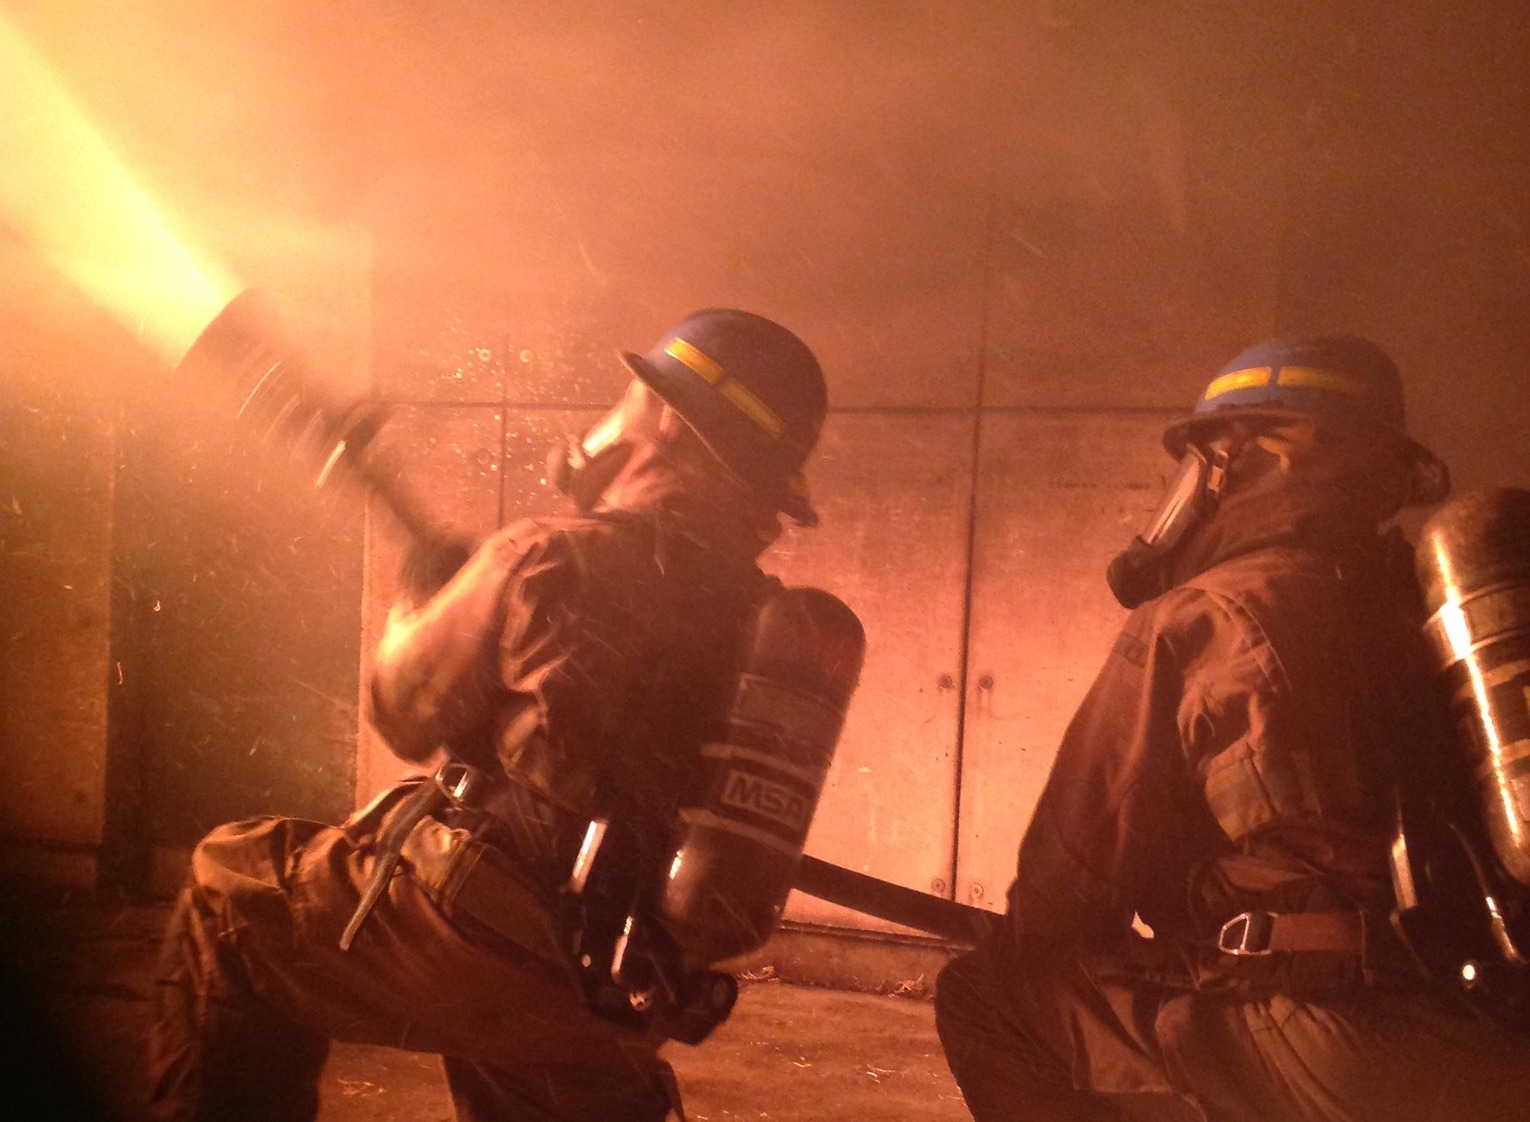 Two fire students using water hose to extinguish a fire